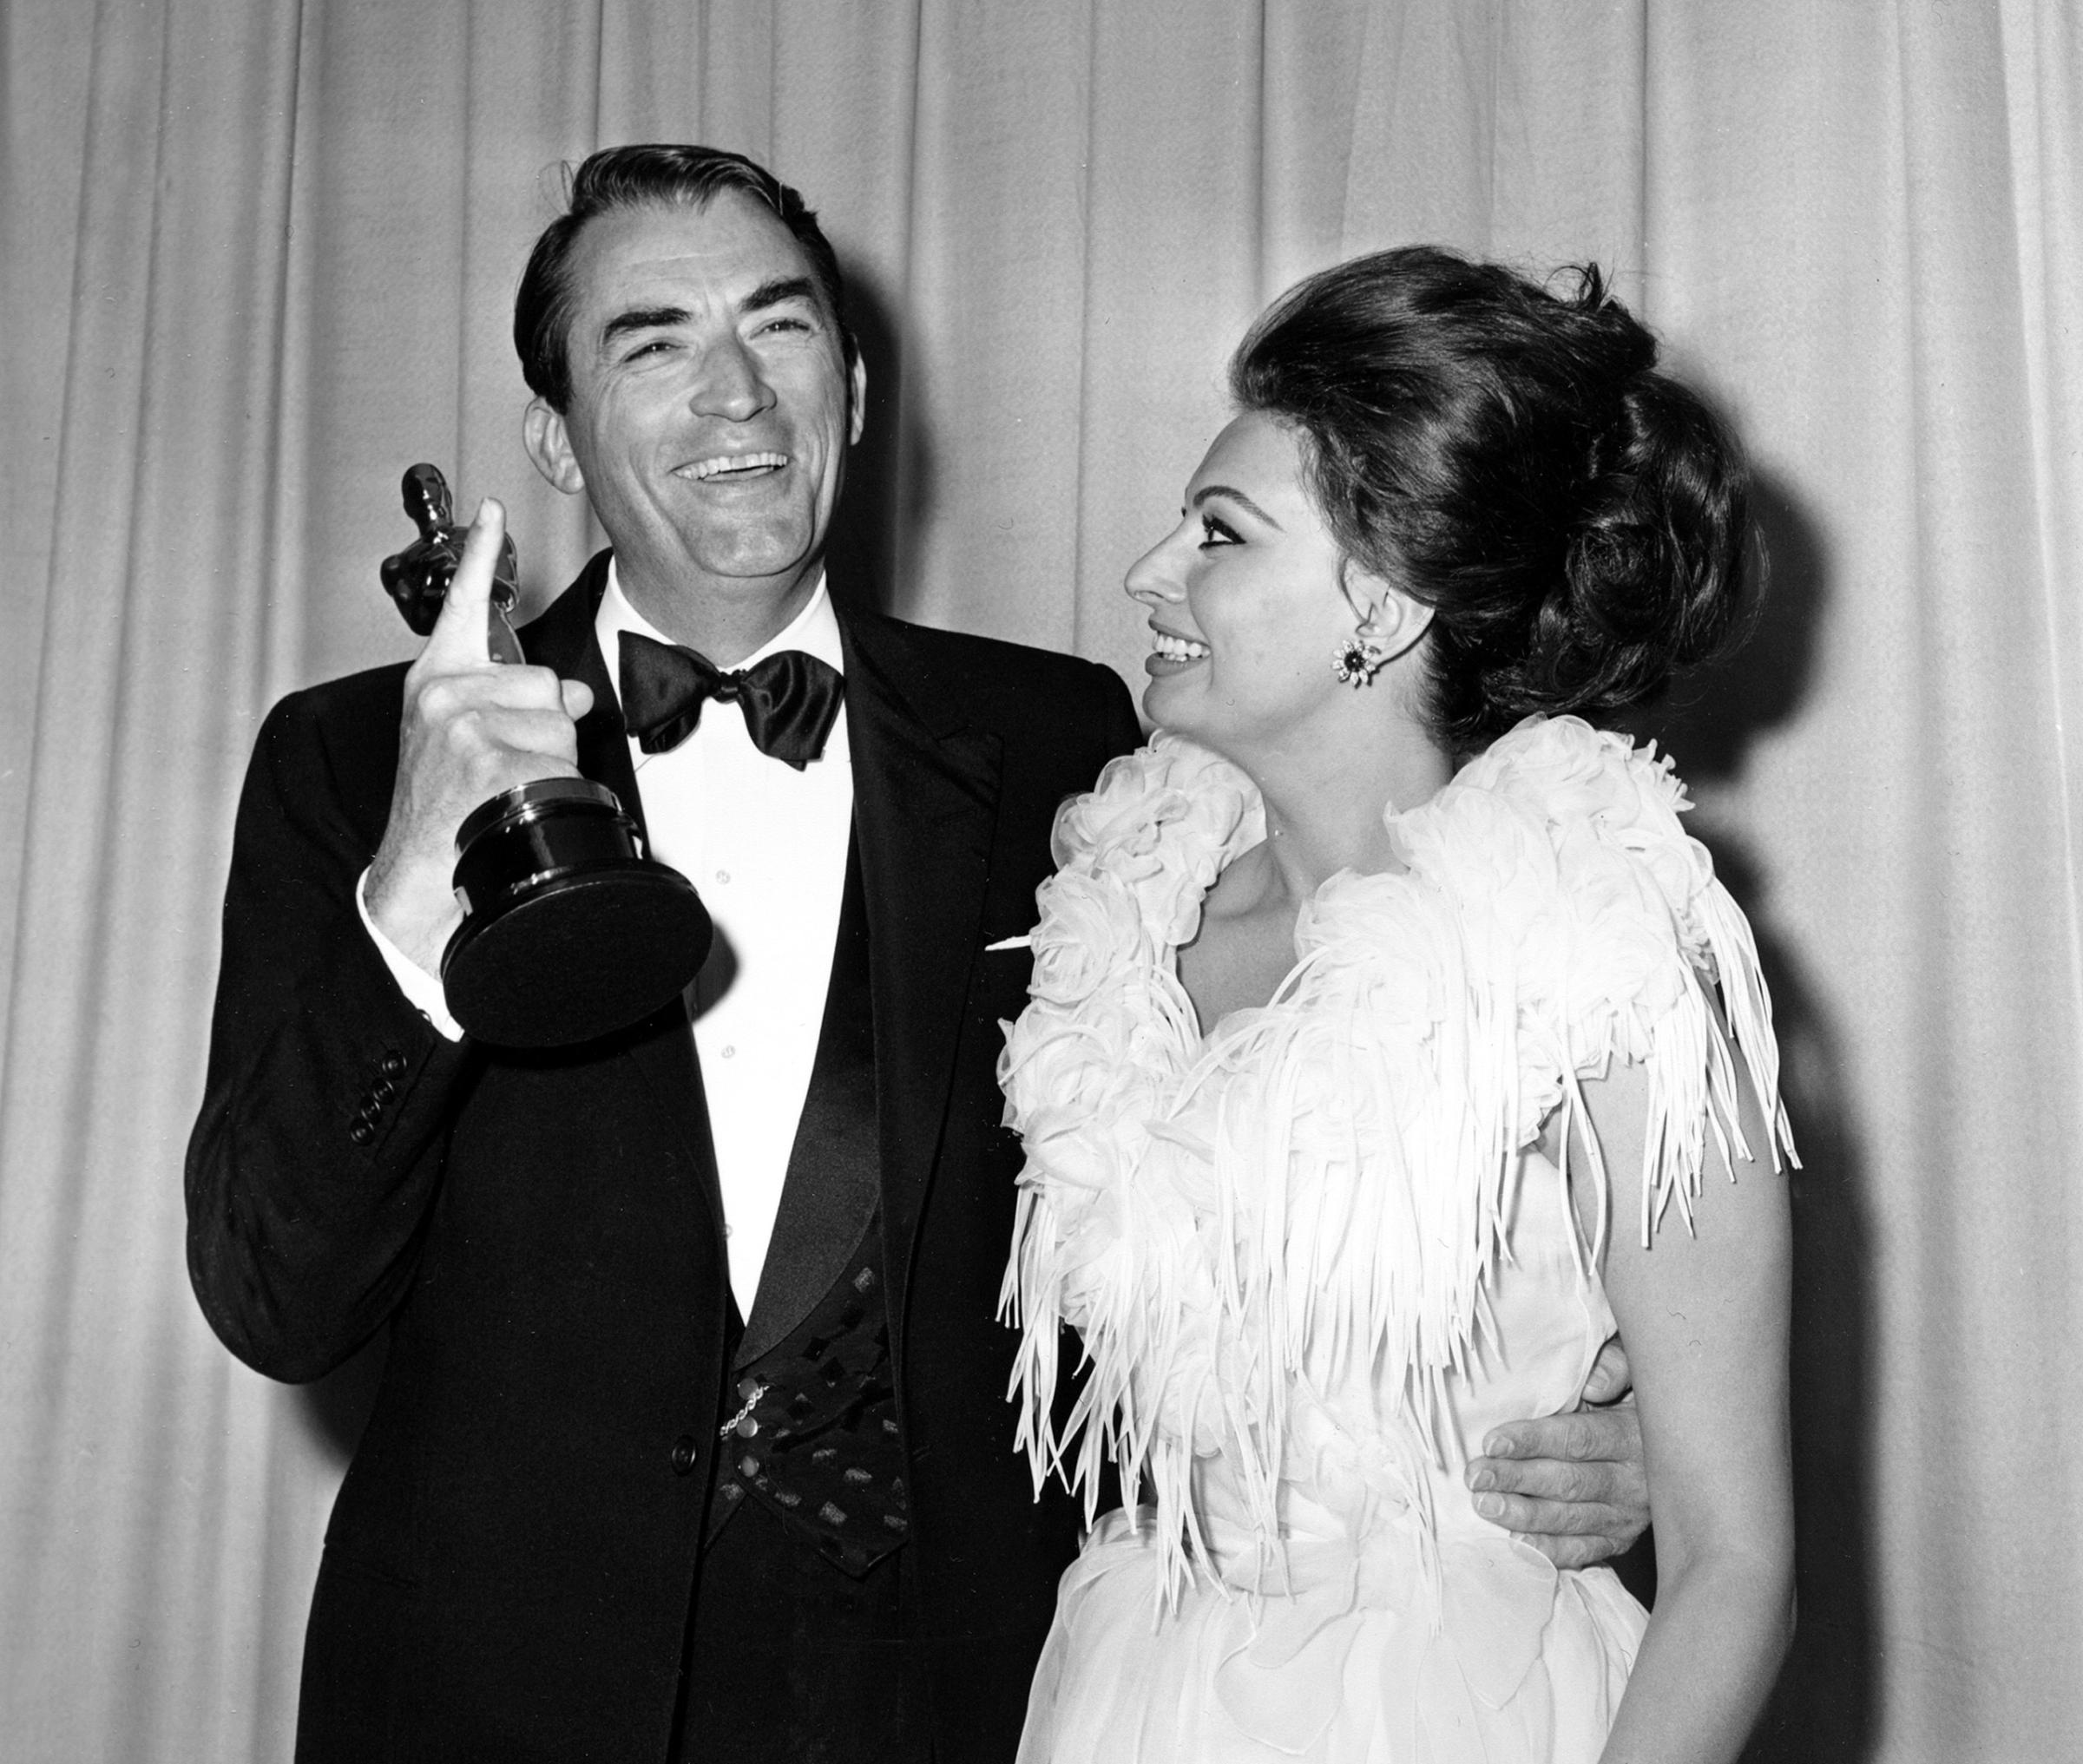 Gregory Peck with Sophia Loren at the Academy Awards, 1963.